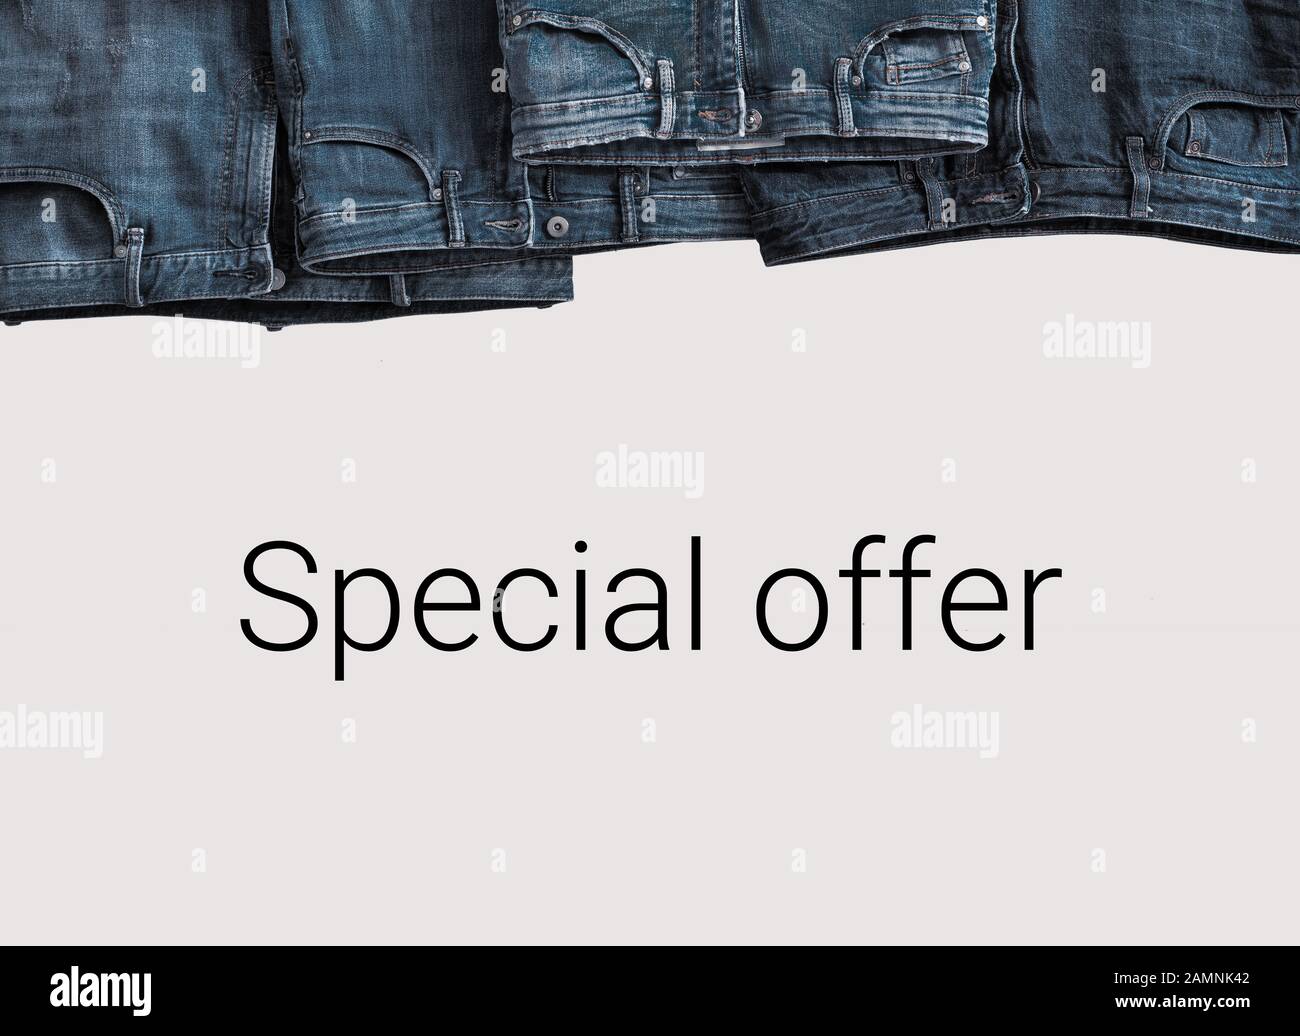 Jeans hang with copy space on bottom edge. Denim and jeans banner. Denim  frame, text place for text. Jeans Casual Fashion banner for special offer  or sale. Horizontal layout template with pants